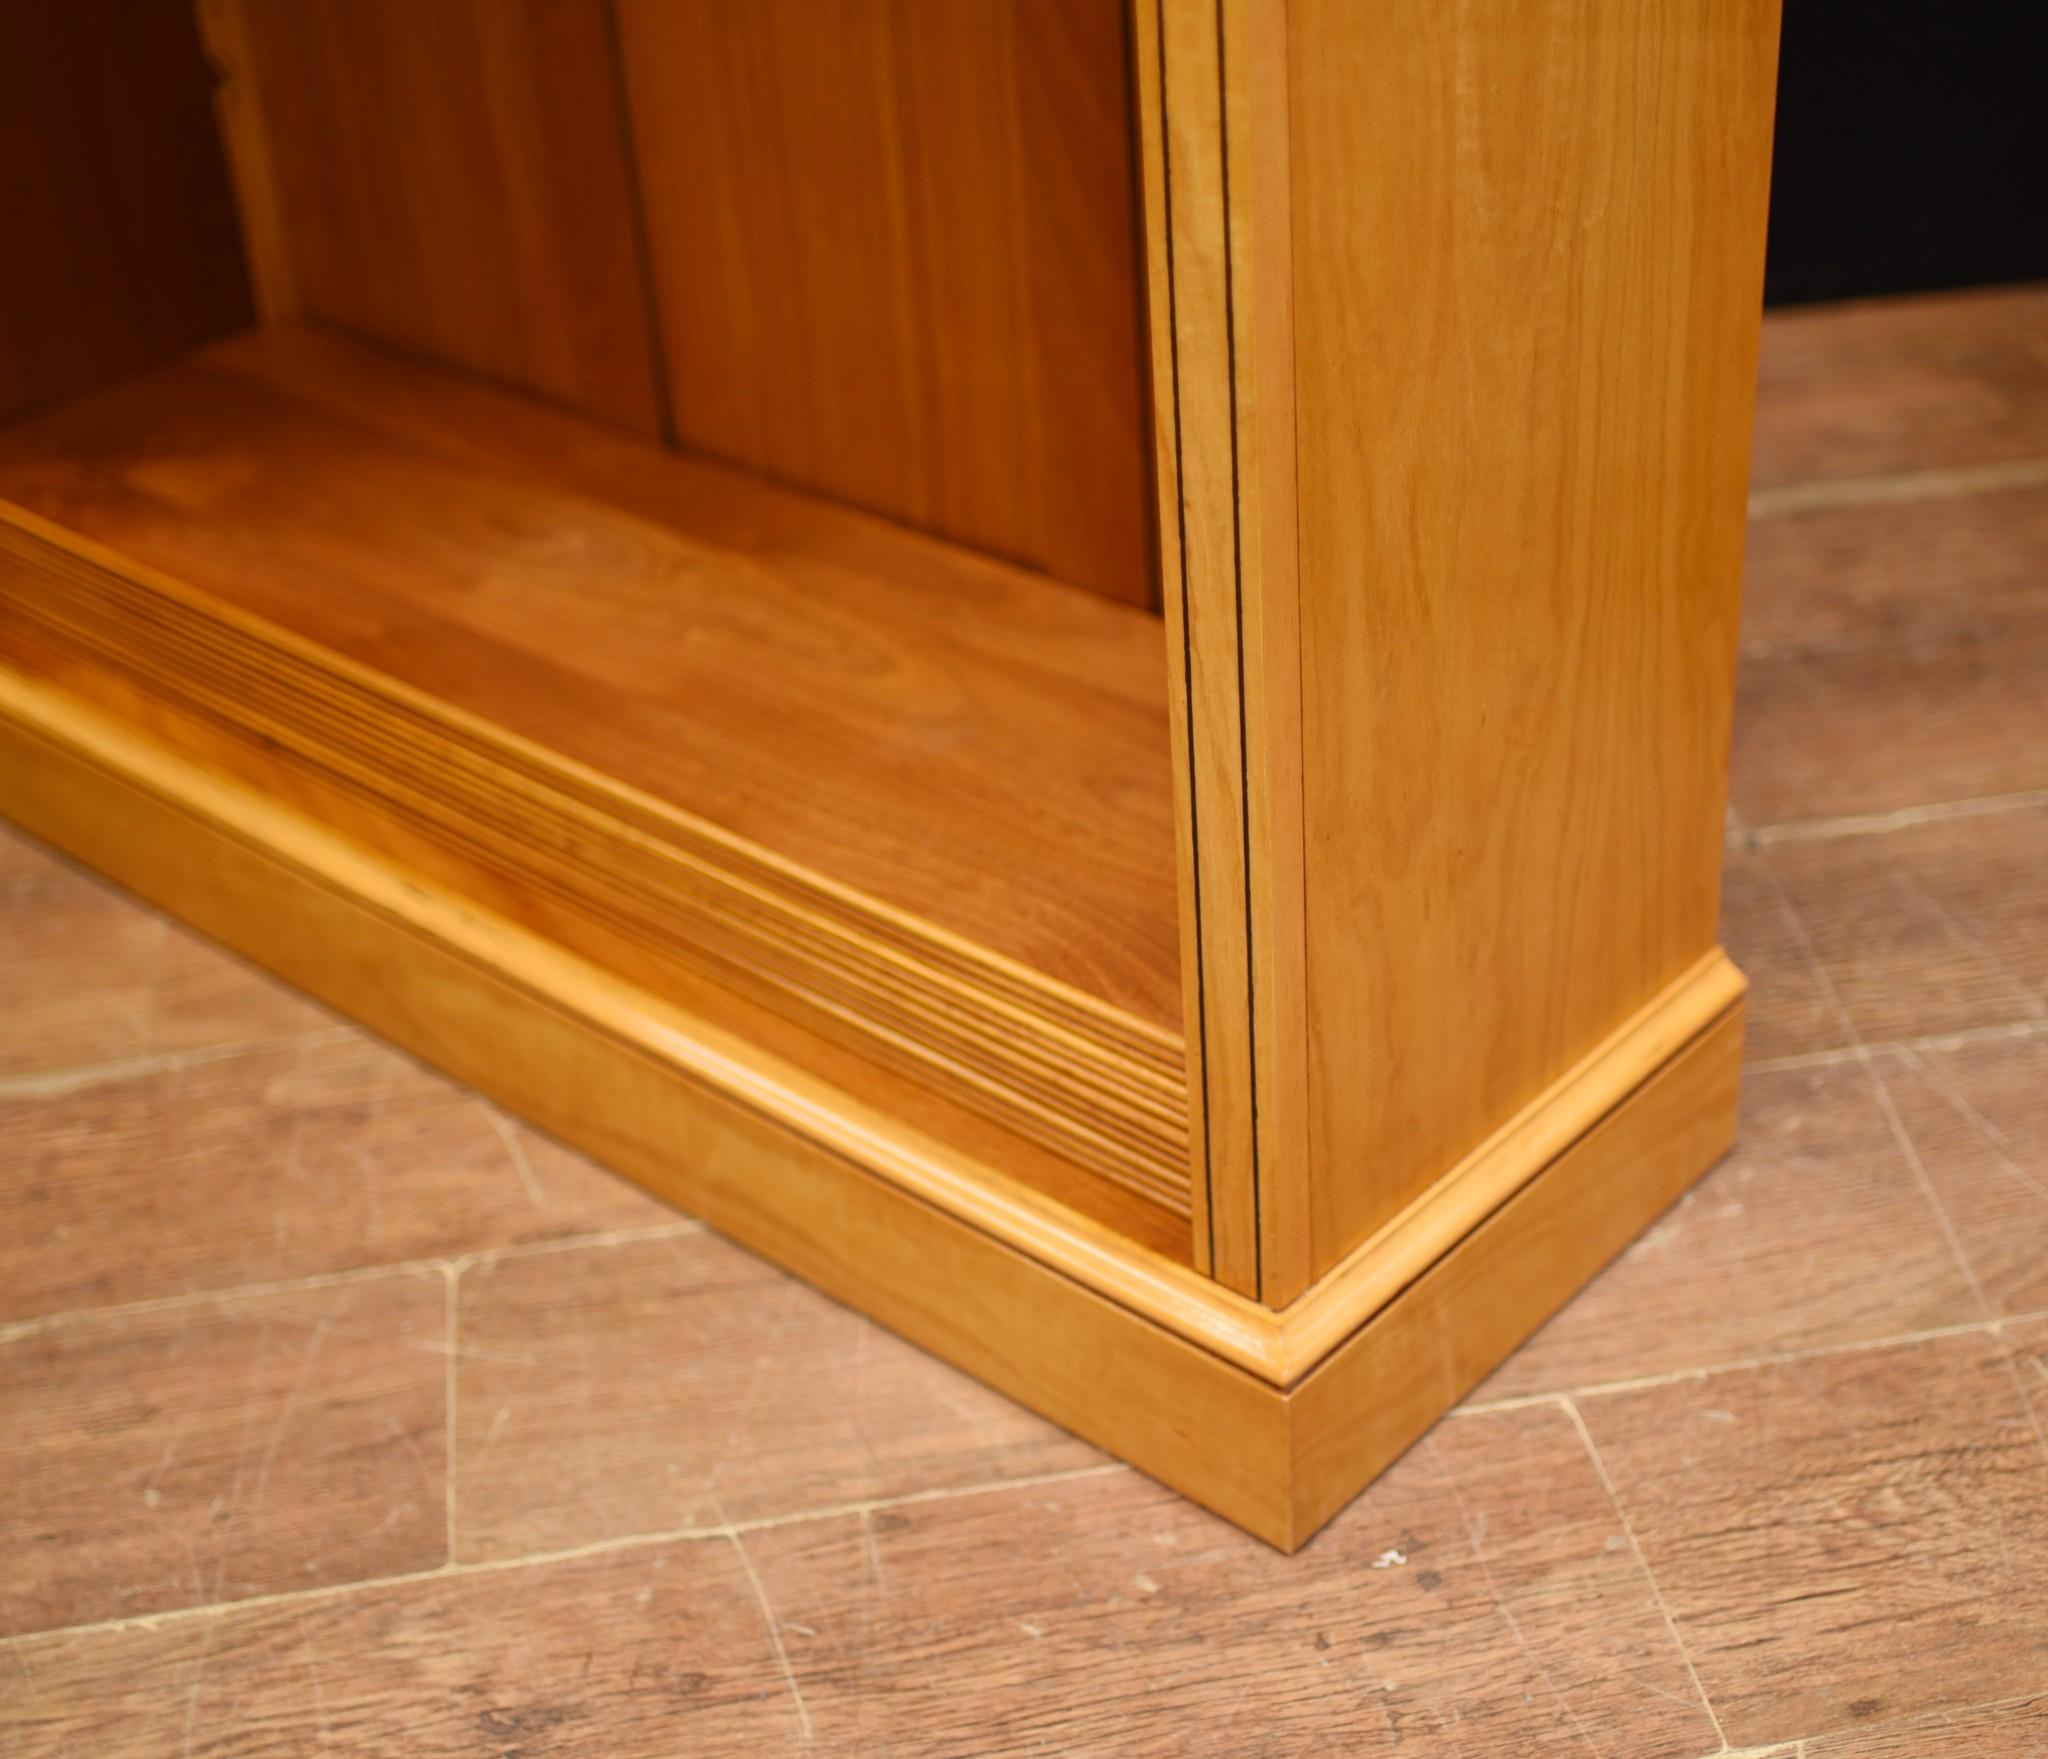 Regency Open Bookcase - Satinwood Sheraton Bookcases In Good Condition For Sale In Potters Bar, GB